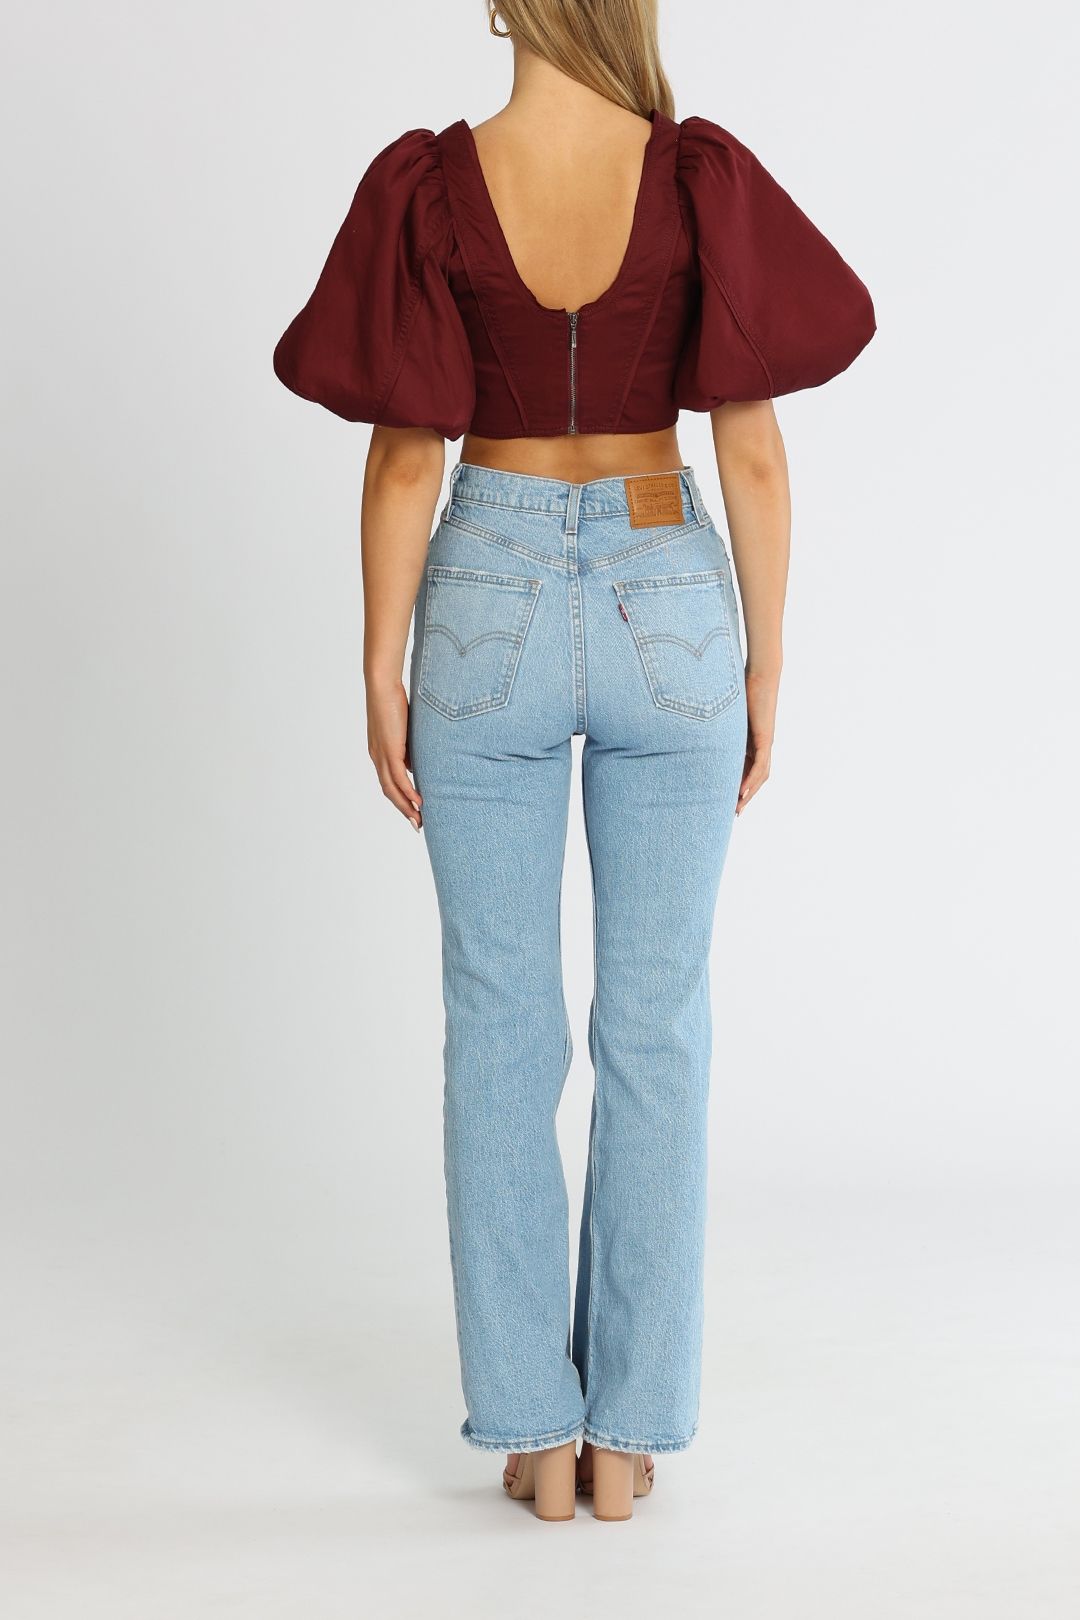 AJE Sylvia Cropped Top Chestnut Red Back Zip